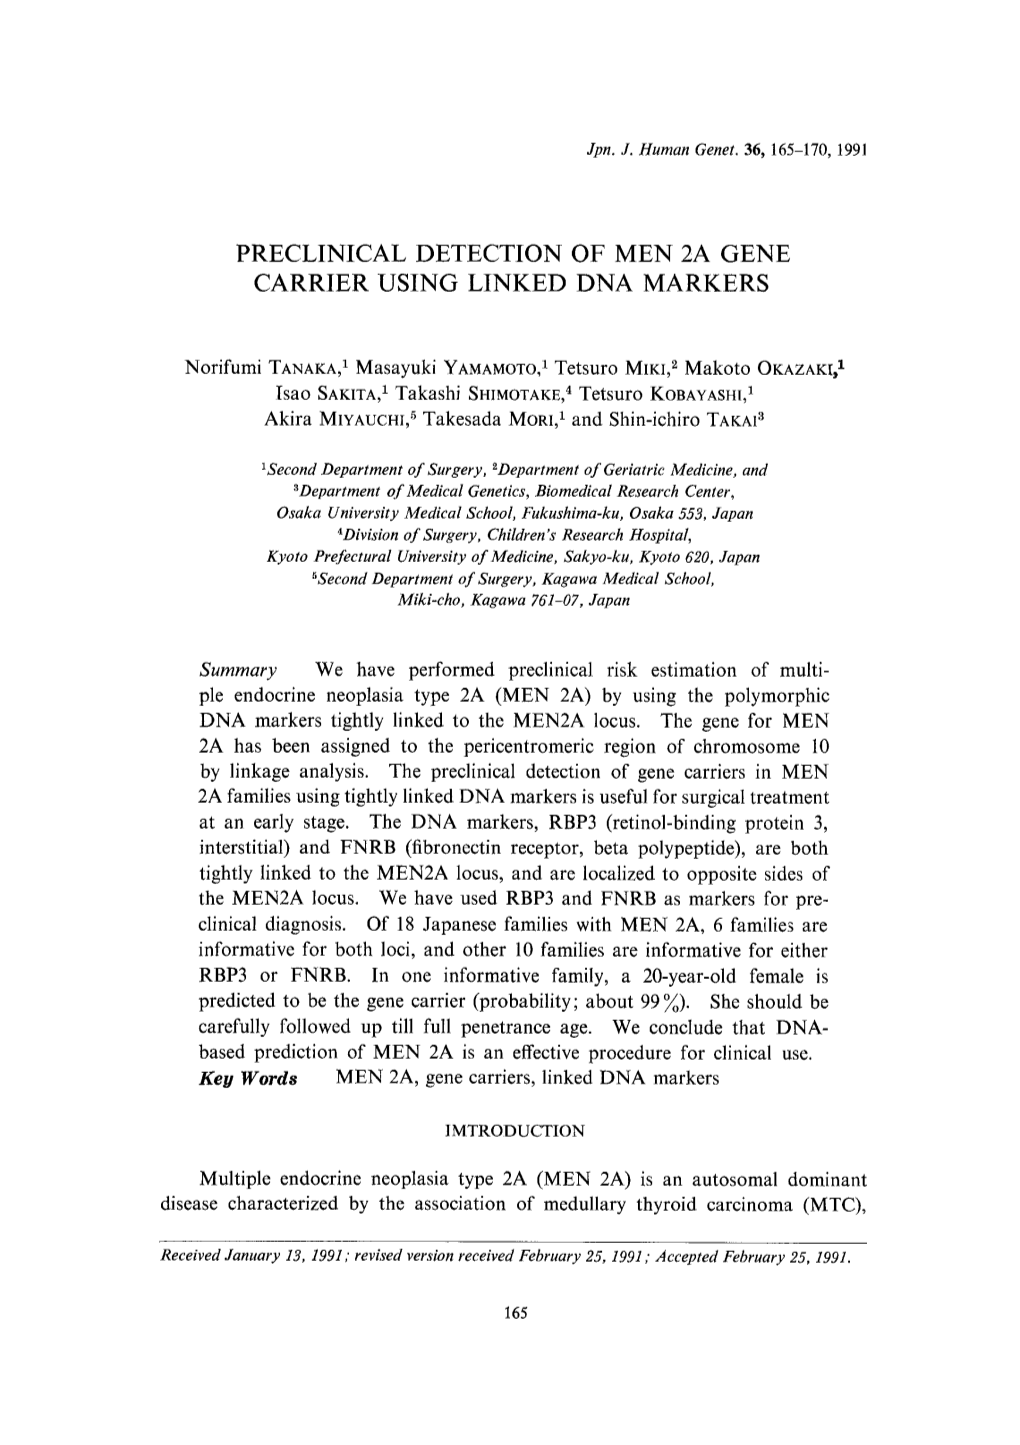 Preclinical Detection of Men 2A Gene Carrier Using Linked Dna Markers